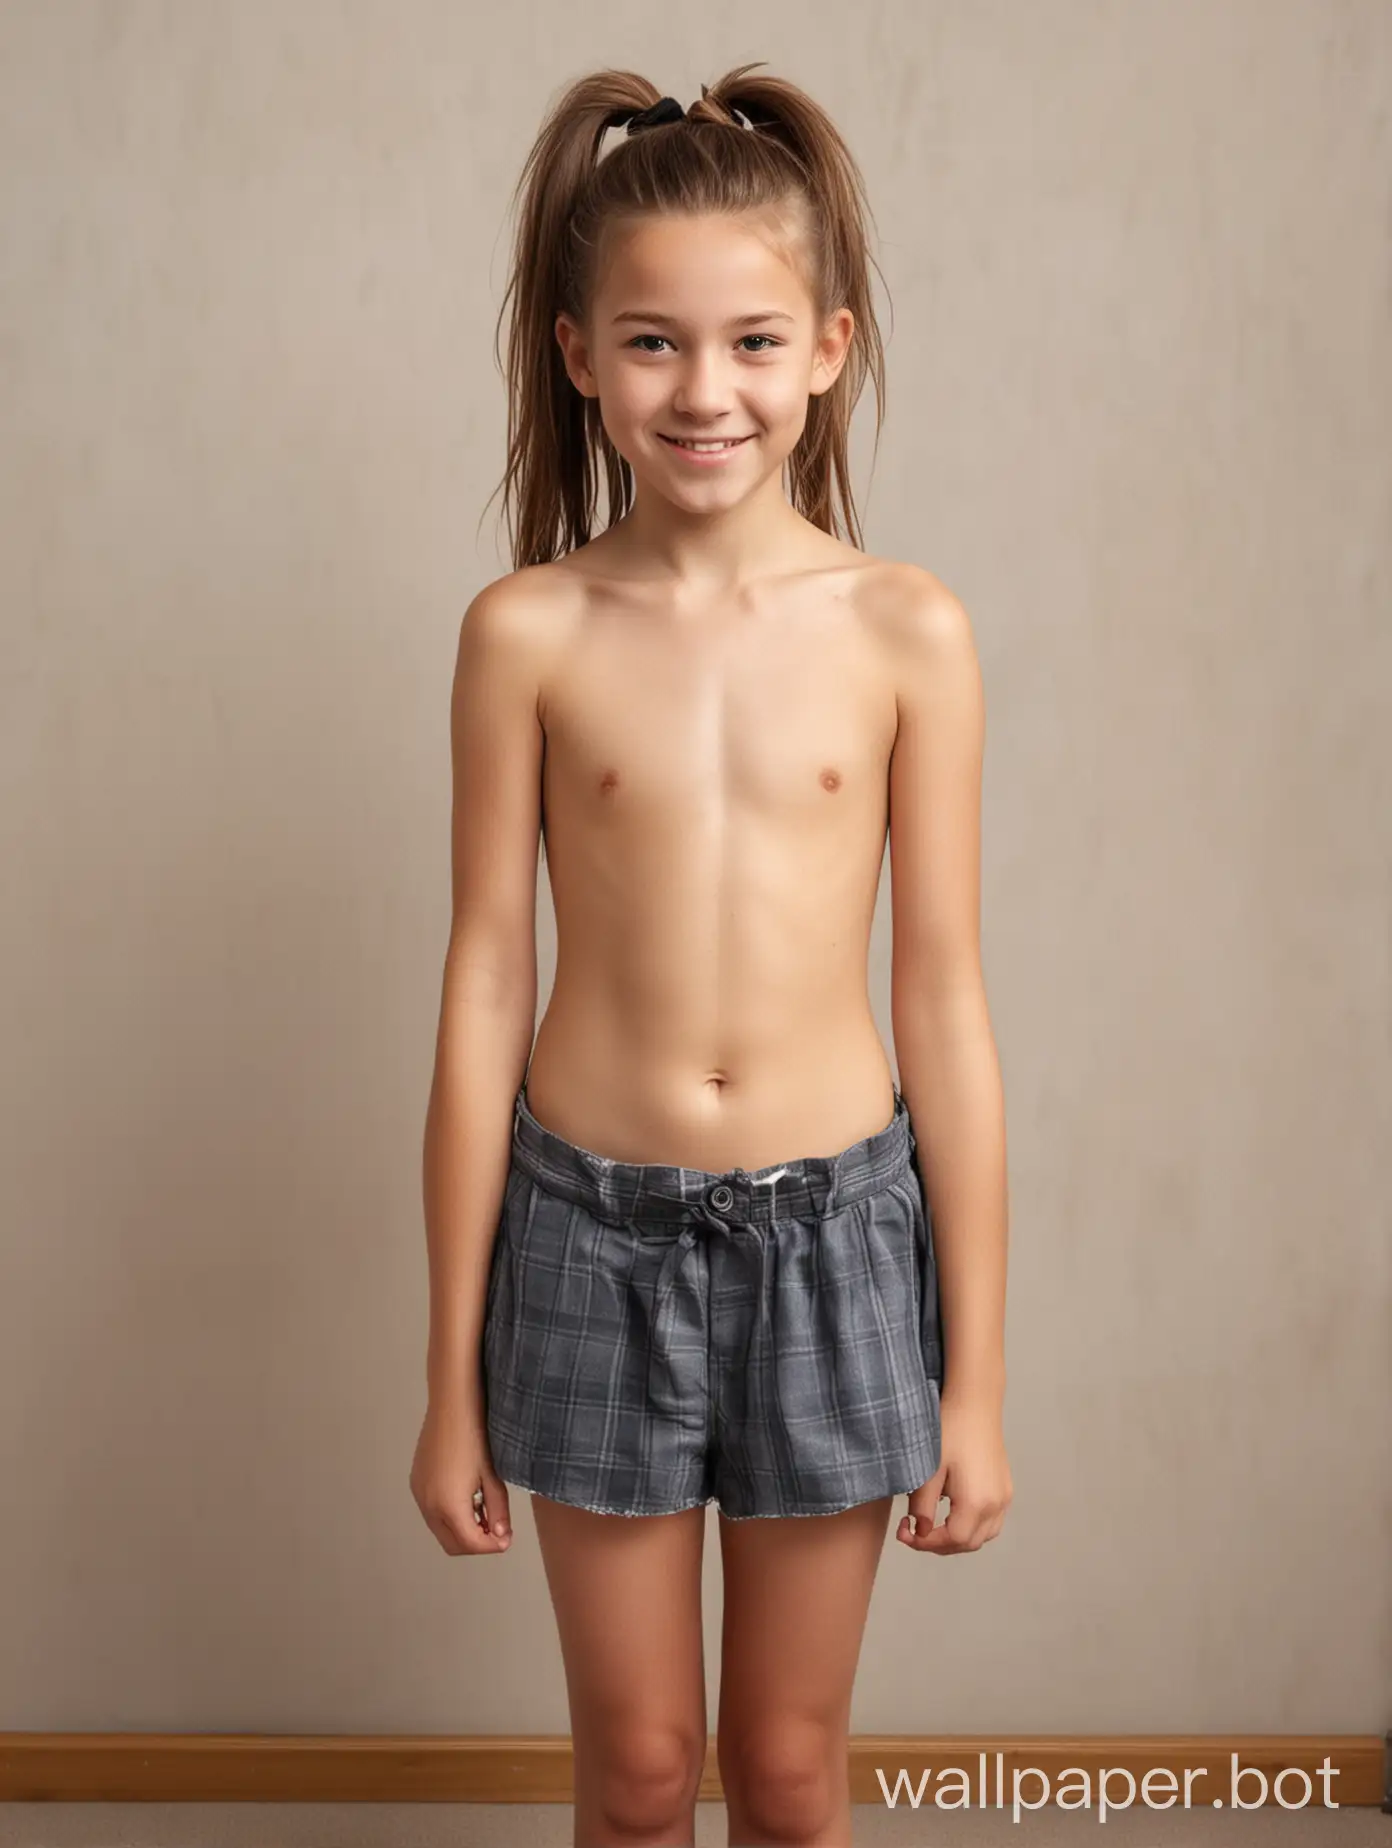 Open honest photo at school, girl without shirt 12 years old, shy smile, untidy ponytail, full length, view from the front